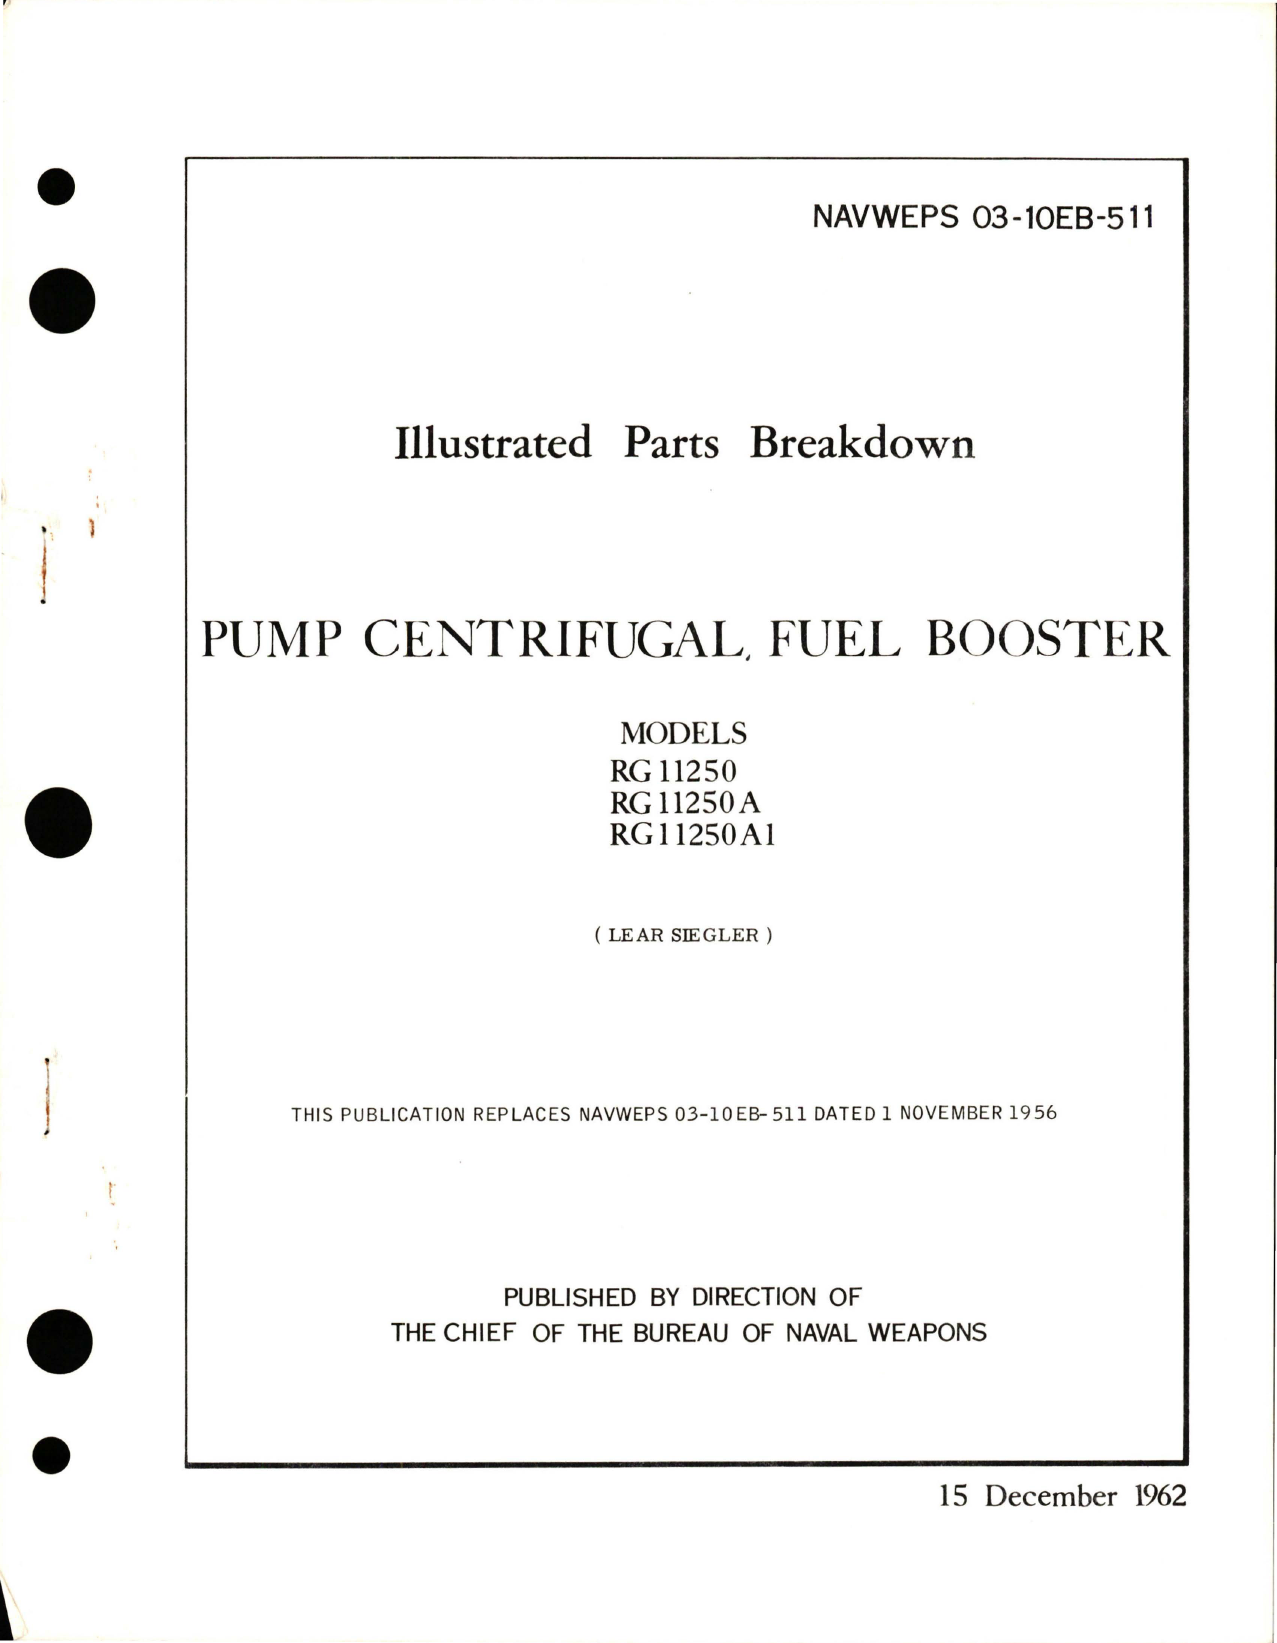 Sample page 1 from AirCorps Library document: Illustrated Parts Breakdown for Centrifugal Fuel Booster Pump - Models RG11250, RG11250A, and RG11250A1 